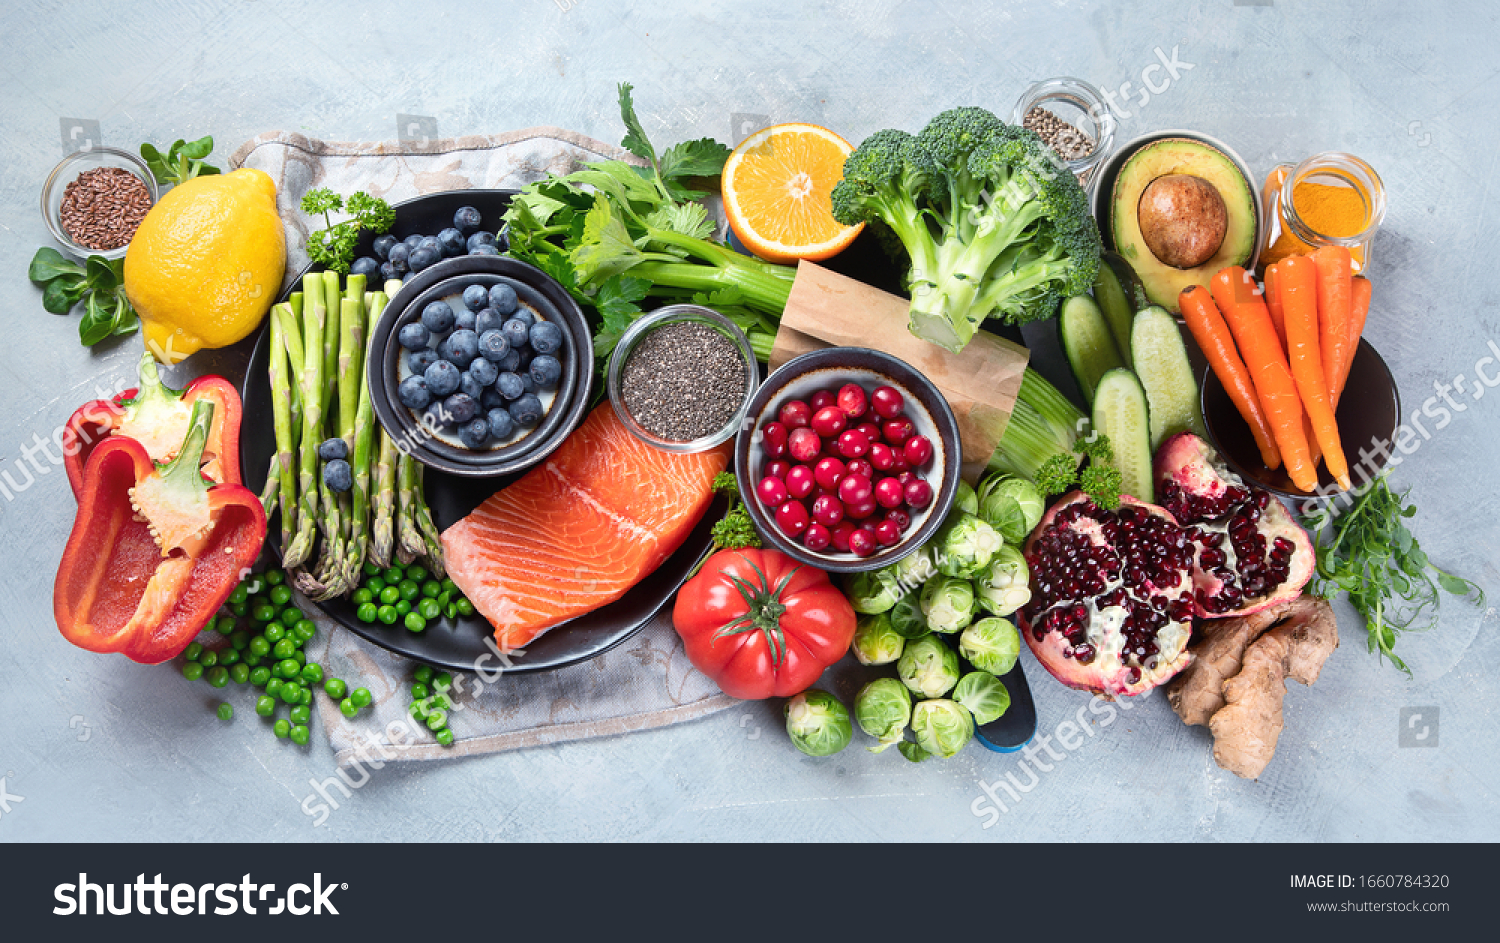 Healthy food selection on gray background. Detox and clean diet concept. Foods high in vitamins, minerals and antioxidants. Anti age foods. Top view #1660784320